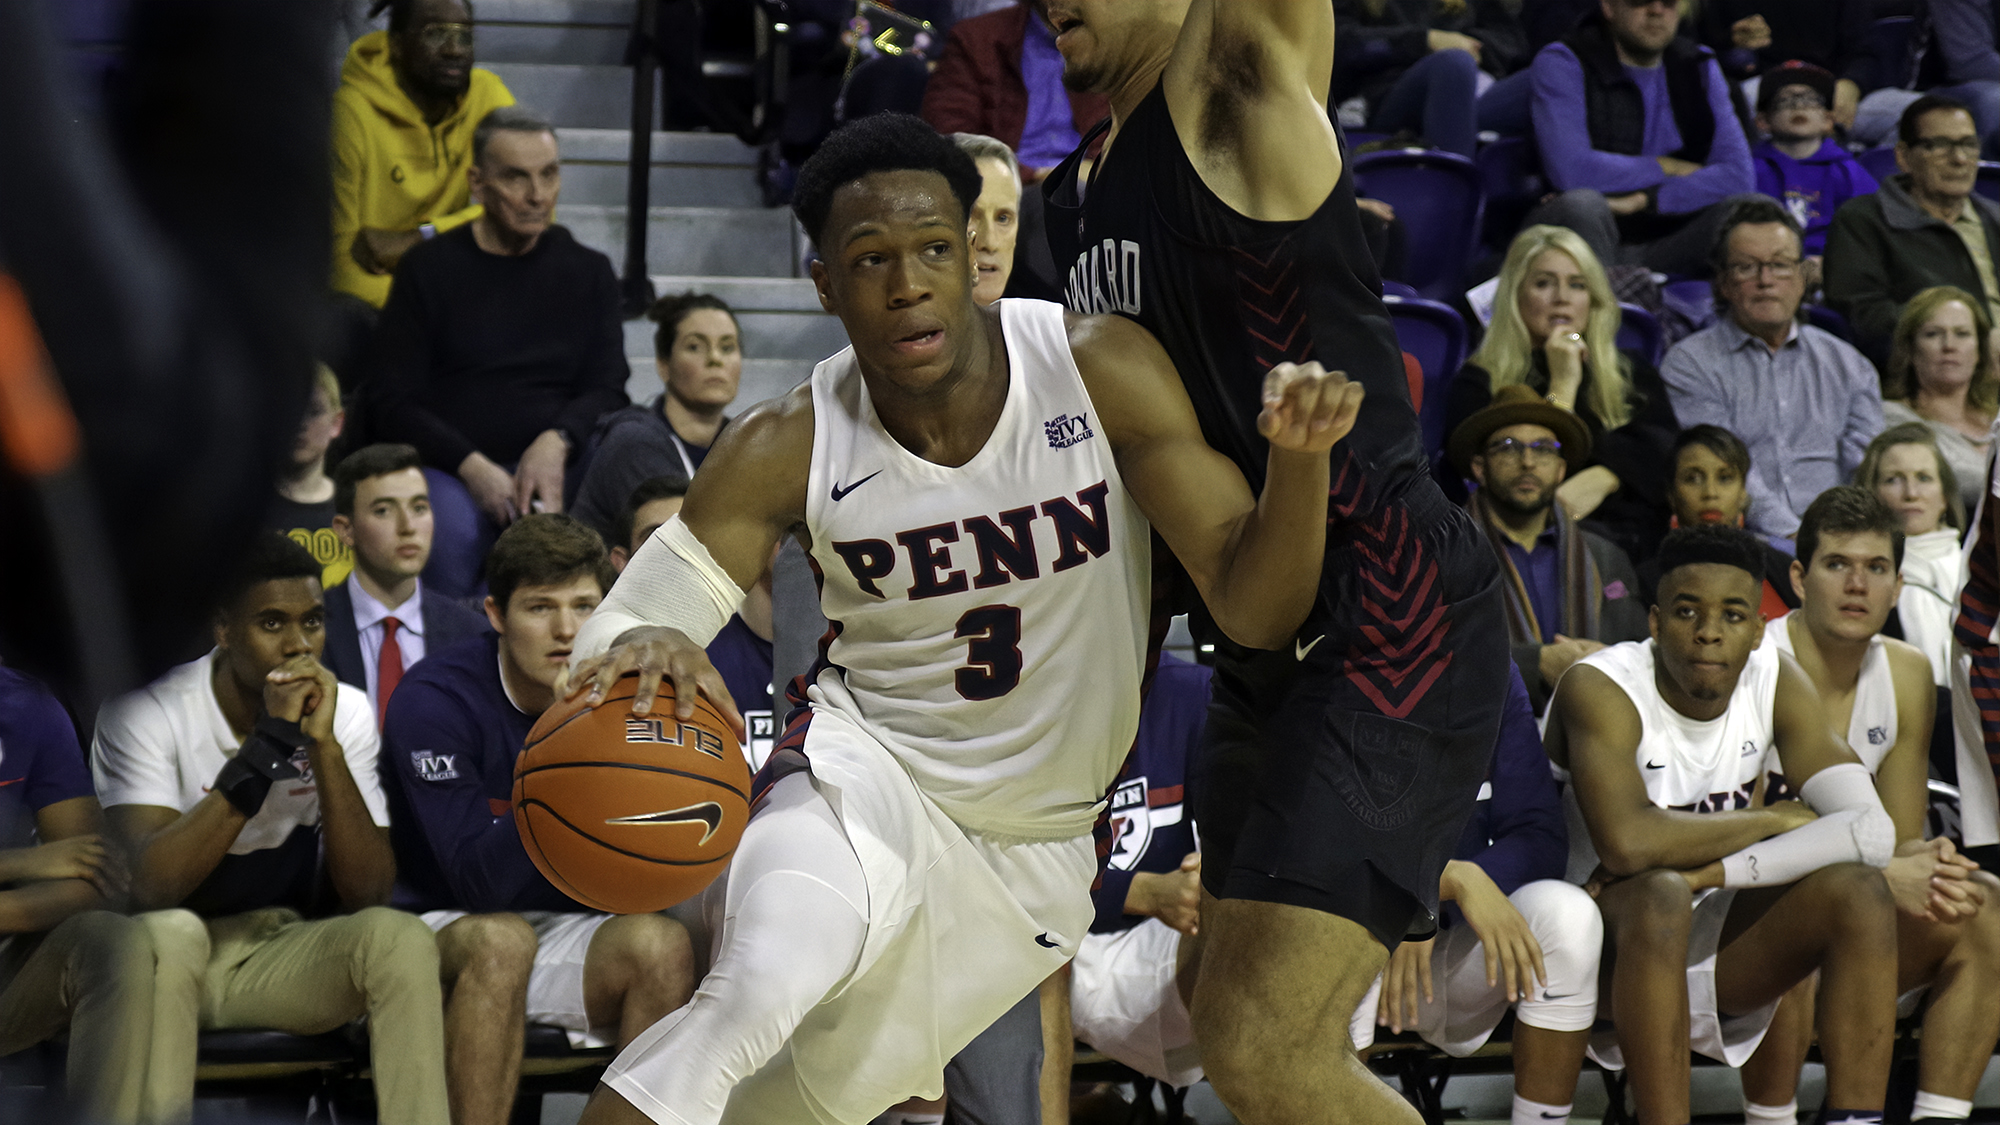 Jordan Dingle of the men's basketball team drives to the basket with the ball at the Palestra versus Harvard.